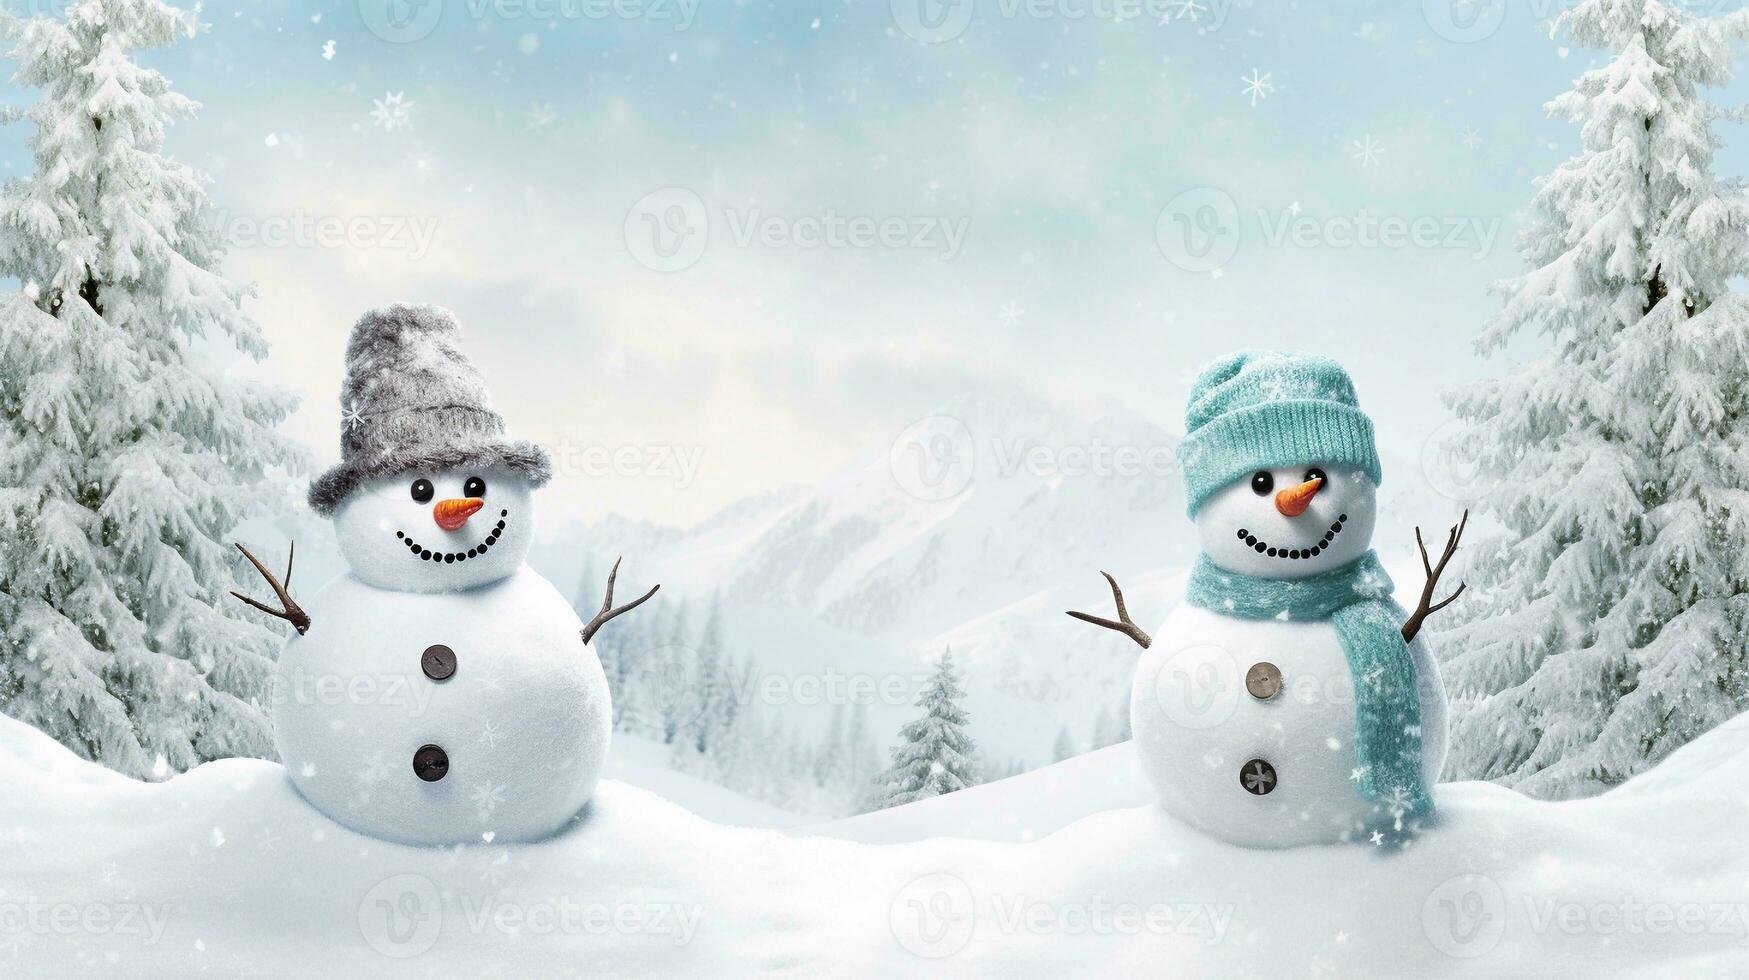 A charming winter scene with two amusing snowmen in quirky poses, positioned against a textured snow-covered hill. AI generated photo